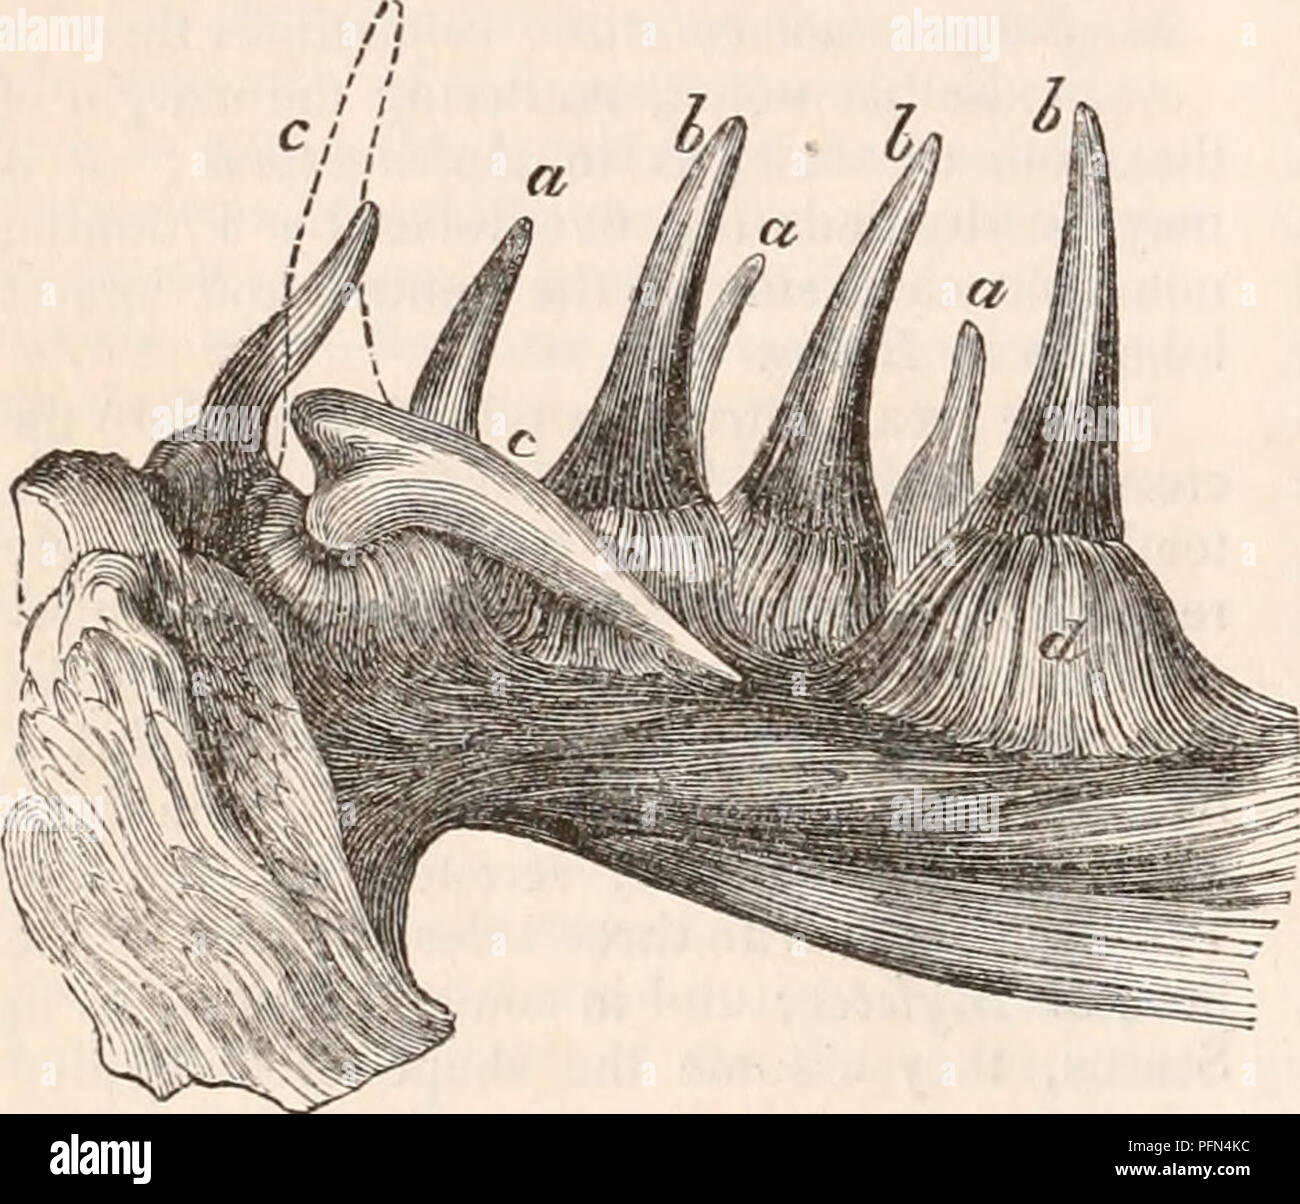 . The cyclopædia of anatomy and physiology. Anatomy; Physiology; Zoology. 978 PISCES. teeth in both jaws would project forwards in- stead of being opposed to one another, and such, in fact, must have been their position were it not that, as in Pimelepterus, the teeth are bent at nearly a right angle with their base. In the Scarus, and likewise in the mar- ginal teeth of the Diadon, where these organs are straight and attached horizontally to the margin of the jaws, their sides instead of their crowns are actually opposed to each other. In the Cod-fish, Wolf-fish, and some other species, in pro Stock Photo